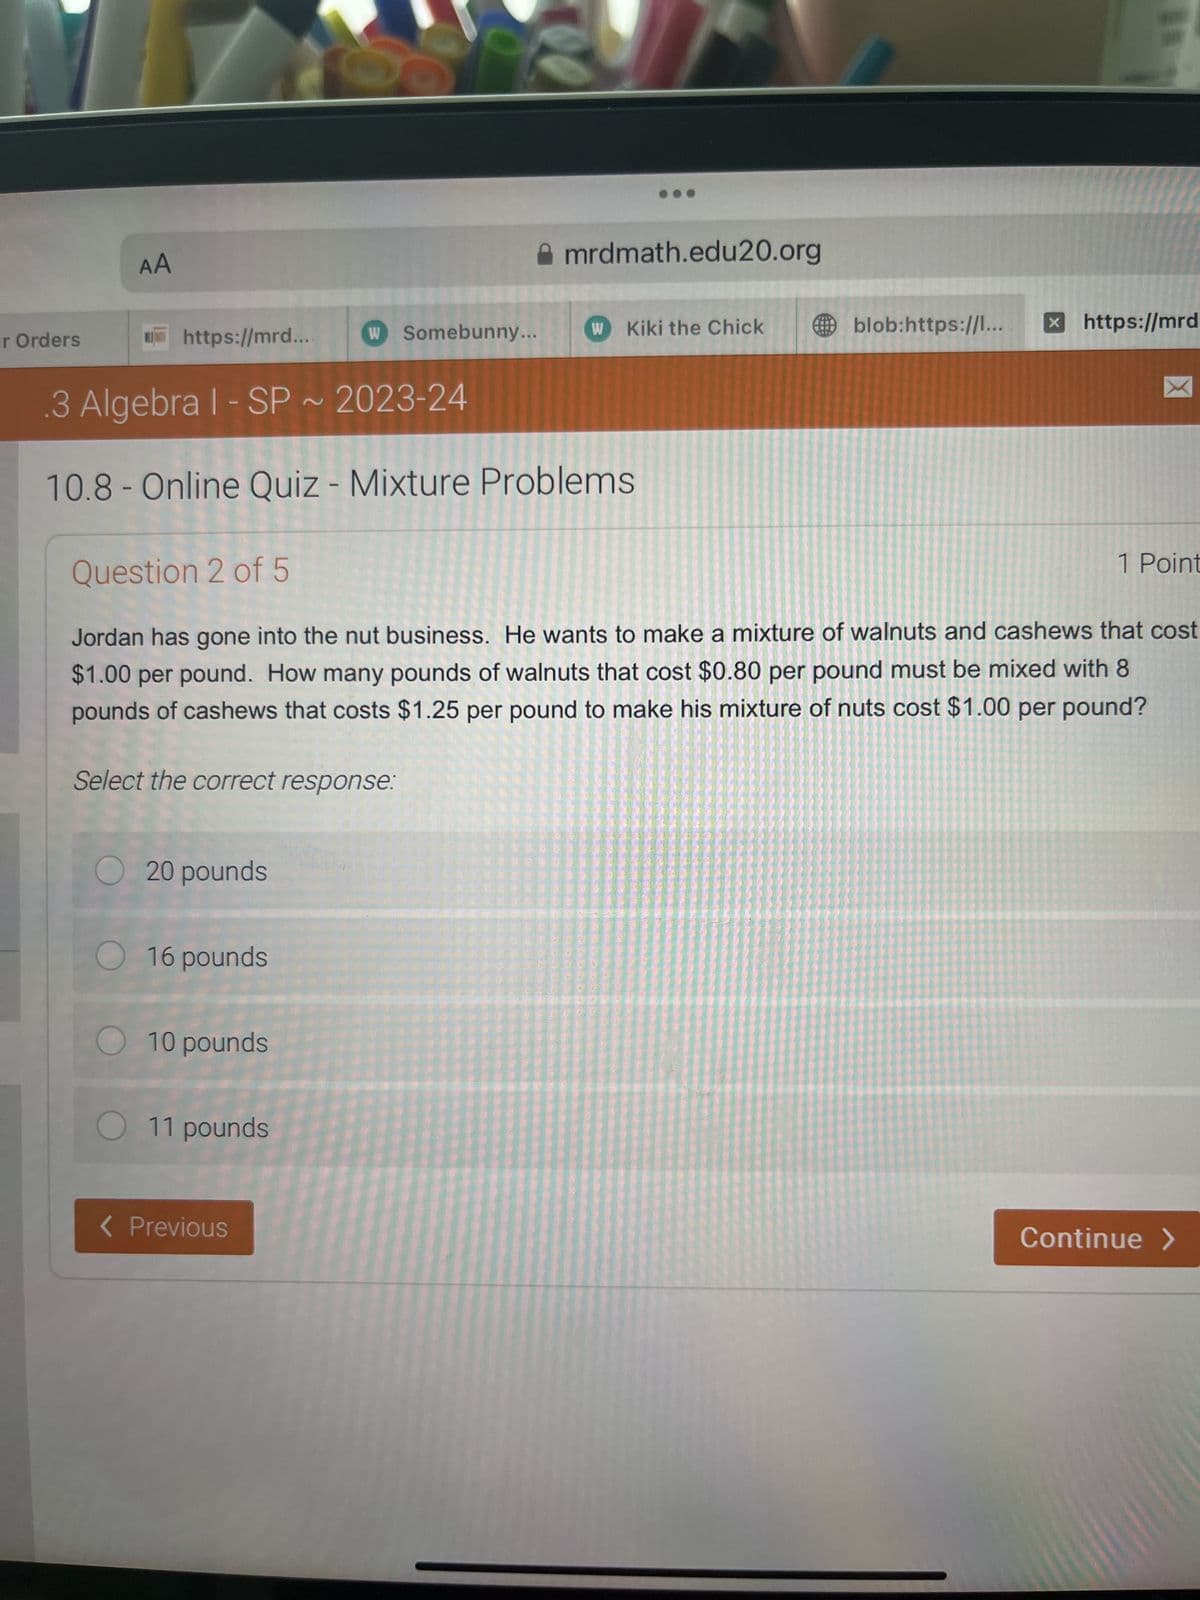 r Orders
AA
mrdmath.edu20.org
https://mrd....
w Somebunny...
W Kiki the Chick
blob:https://l...
> https://mrd
3 Algebra 1 - SP ~ 2023-24
2
10.8- Online Quiz - Mixture Problems
Question 2 of 5
1 Point
Jordan has gone into the nut business. He wants to make a mixture of walnuts and cashews that cost
$1.00 per pound. How many pounds of walnuts that cost $0.80 per pound must be mixed with 8
pounds of cashews that costs $1.25 per pound to make his mixture of nuts cost $1.00 per pound?
Select the correct response:
20 pounds
16 pounds
10 pounds
11 pounds
< Previous
Continue >